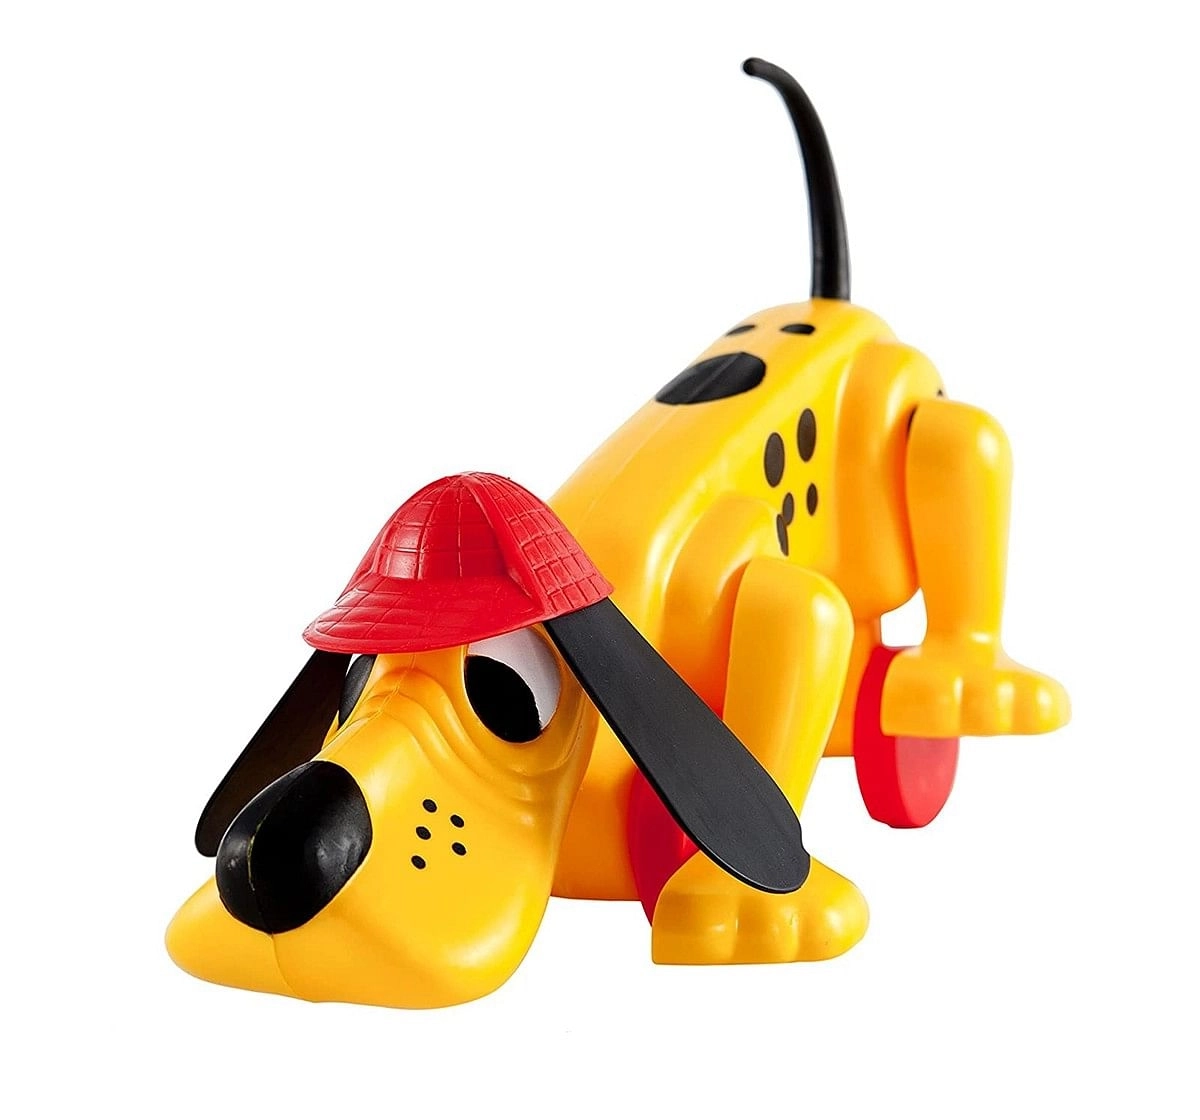 Giggles Digger The Dog Activity Toys for Kids age 12M+ (Yellow)